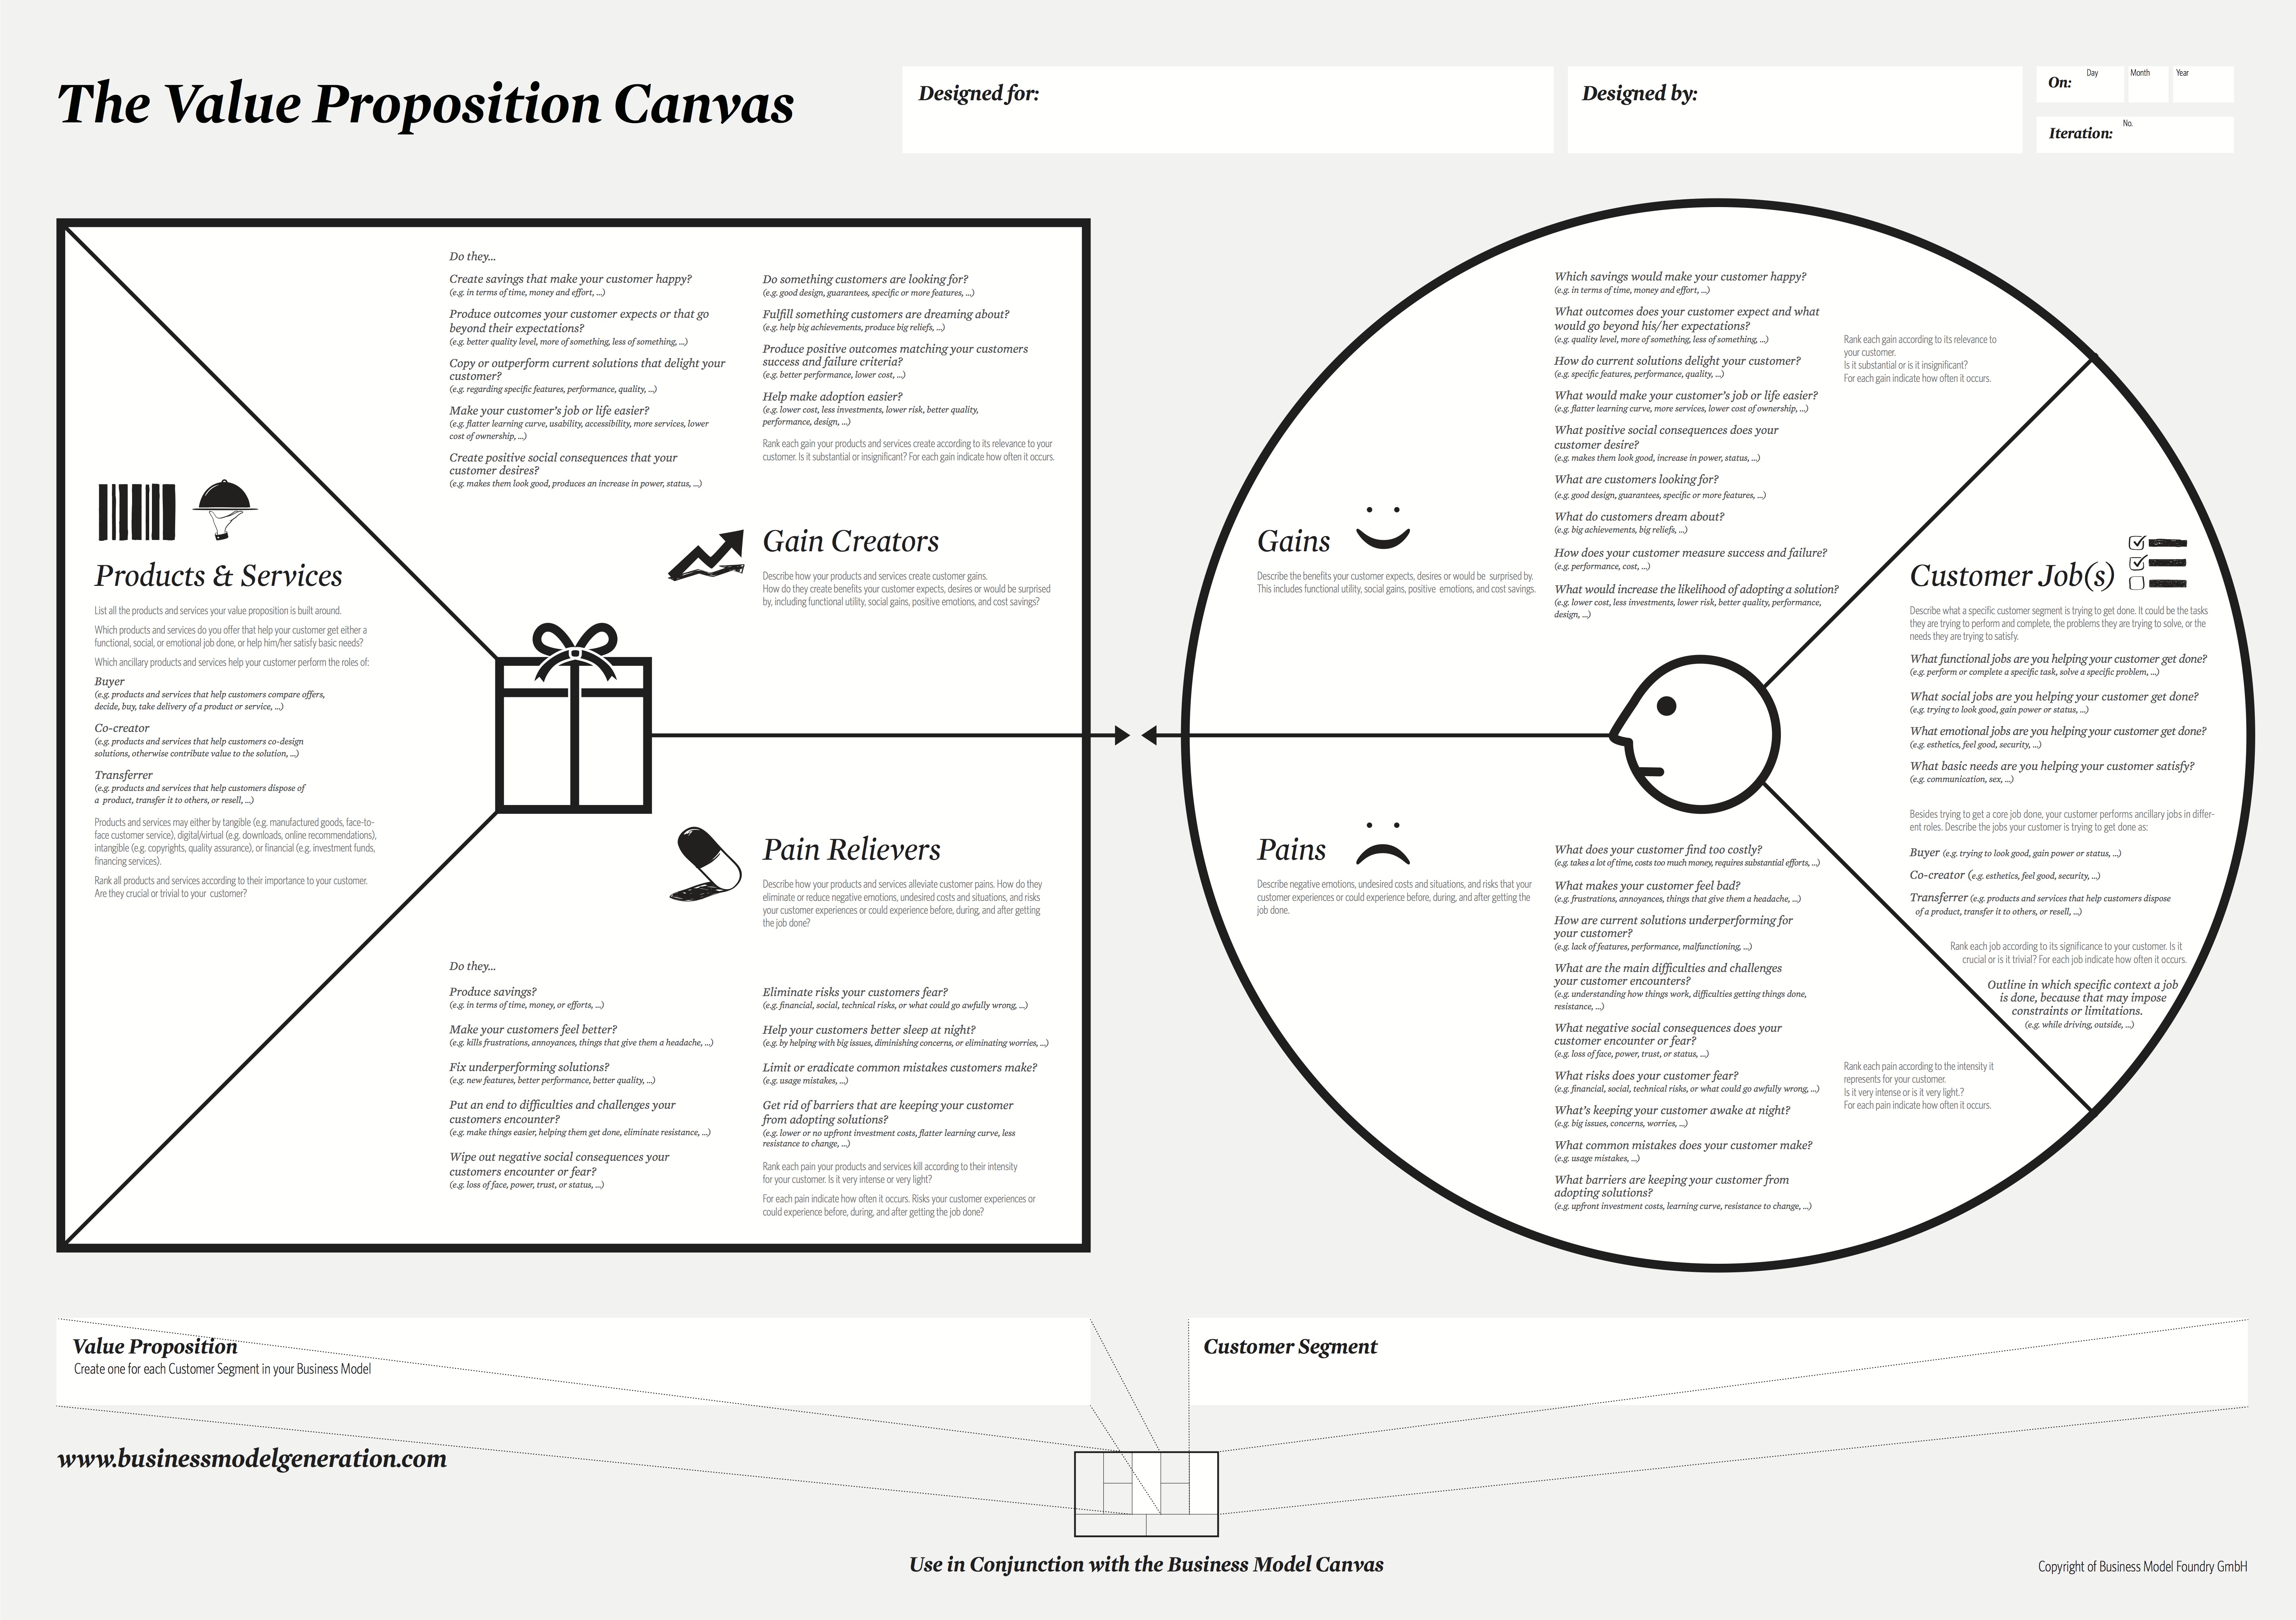 Steve Blank The Mission Model Canvas – An Adapted Business Model Canvas